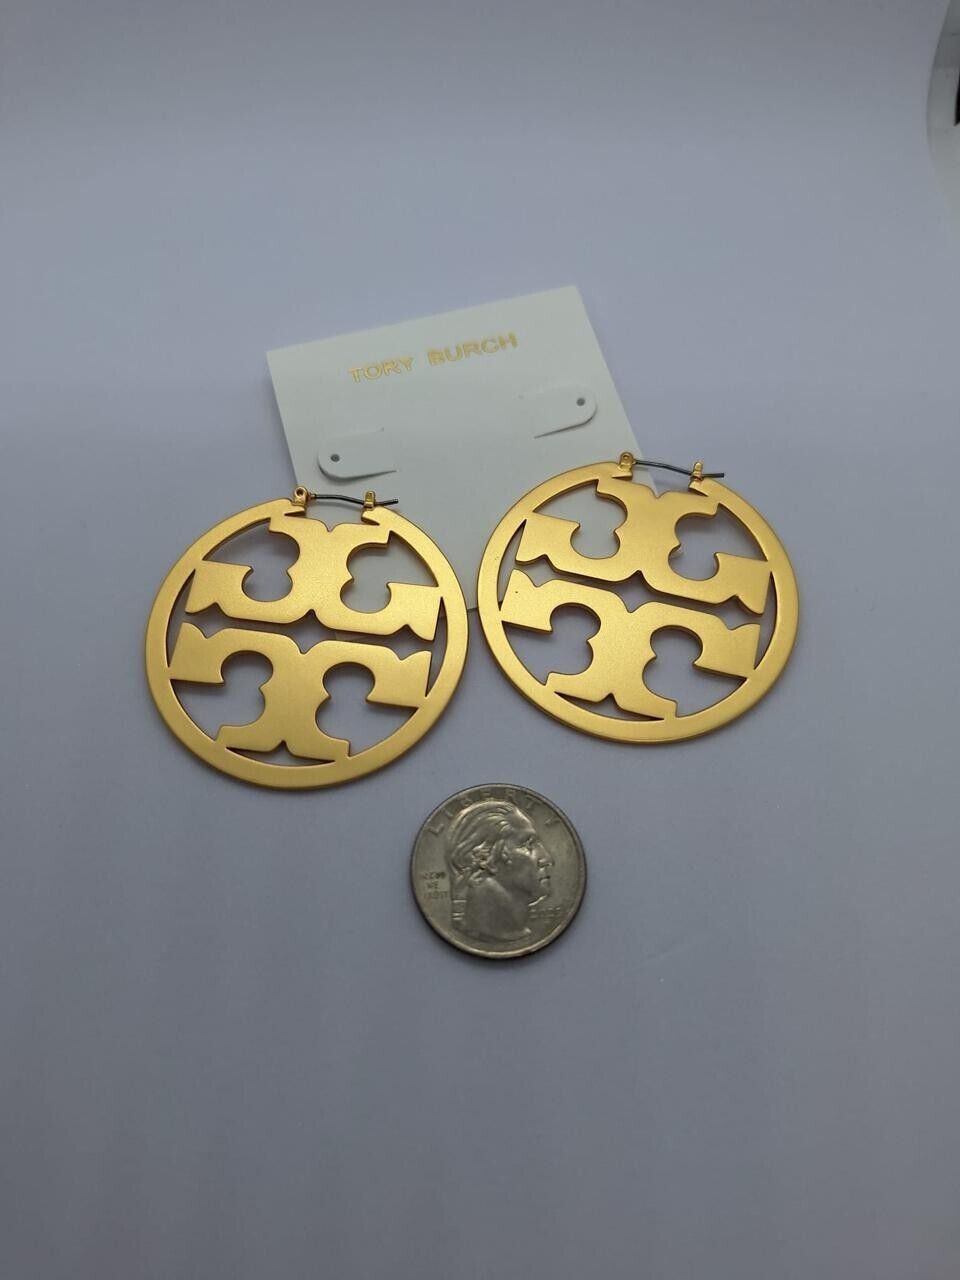 Tory burch Miller  Matte Gold Hoop Earrings 18K Gold-Plated  With dust bag